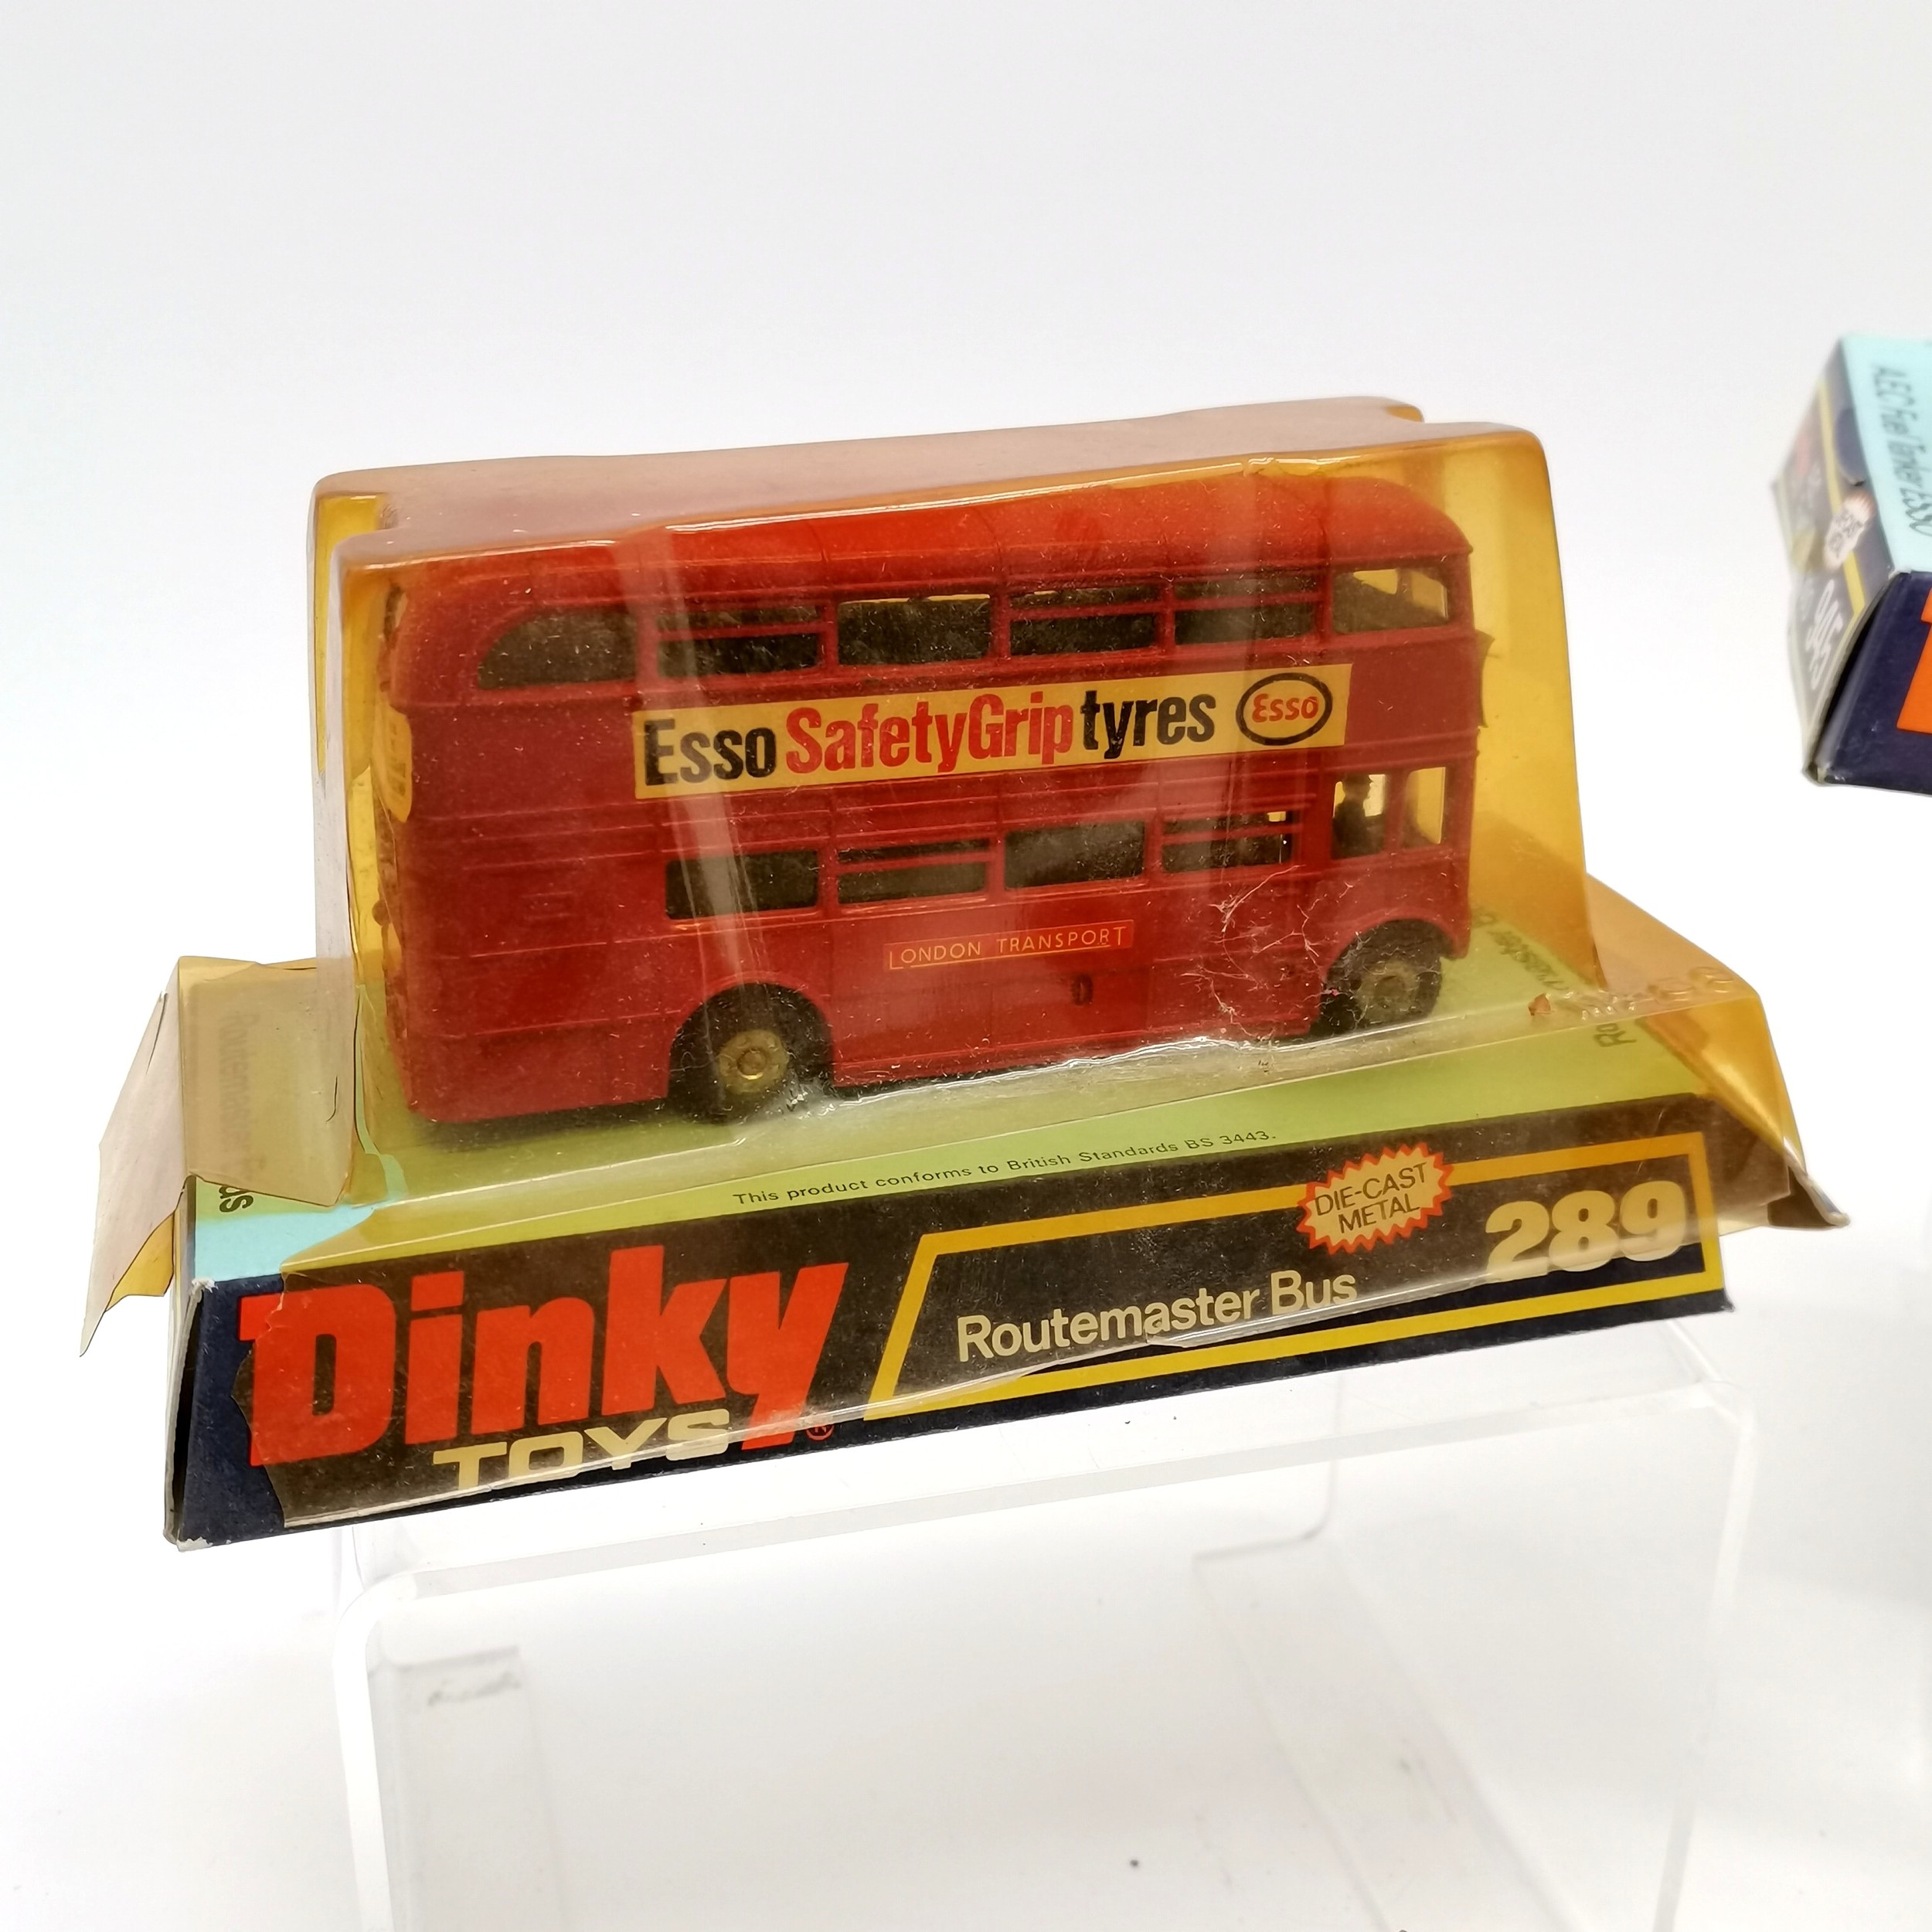 Collection of boxed and unboxed Dinky toys including 725 F-4K Phantom II, 289 Routemaster bus, A.E.C - Image 3 of 6